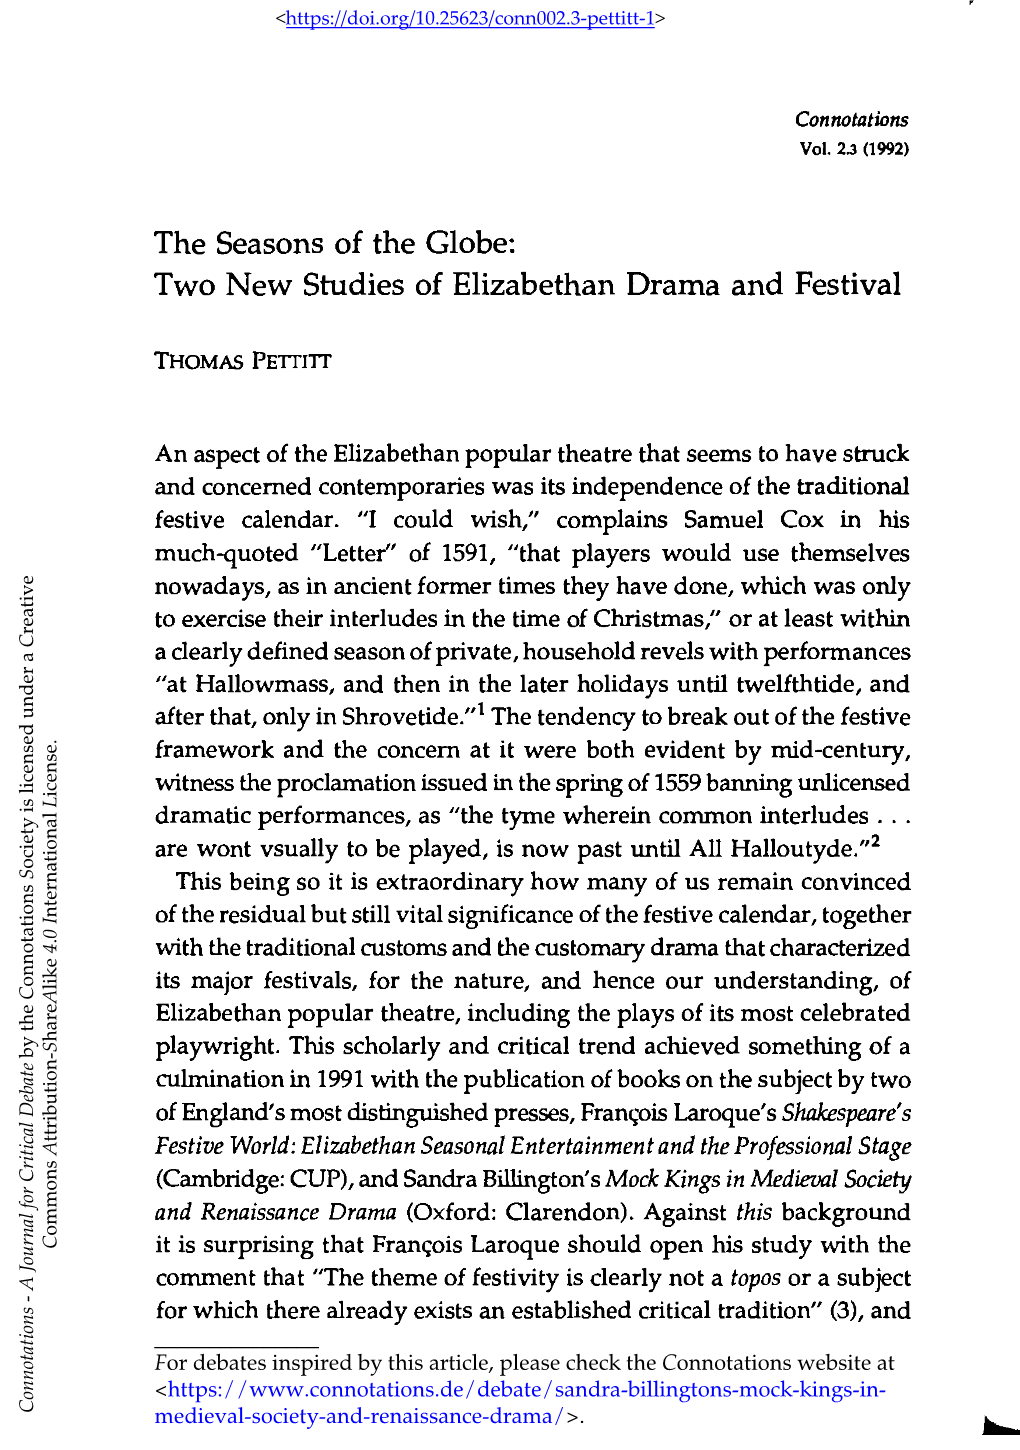 Two New Studies of Elizabethan Drama and Festival